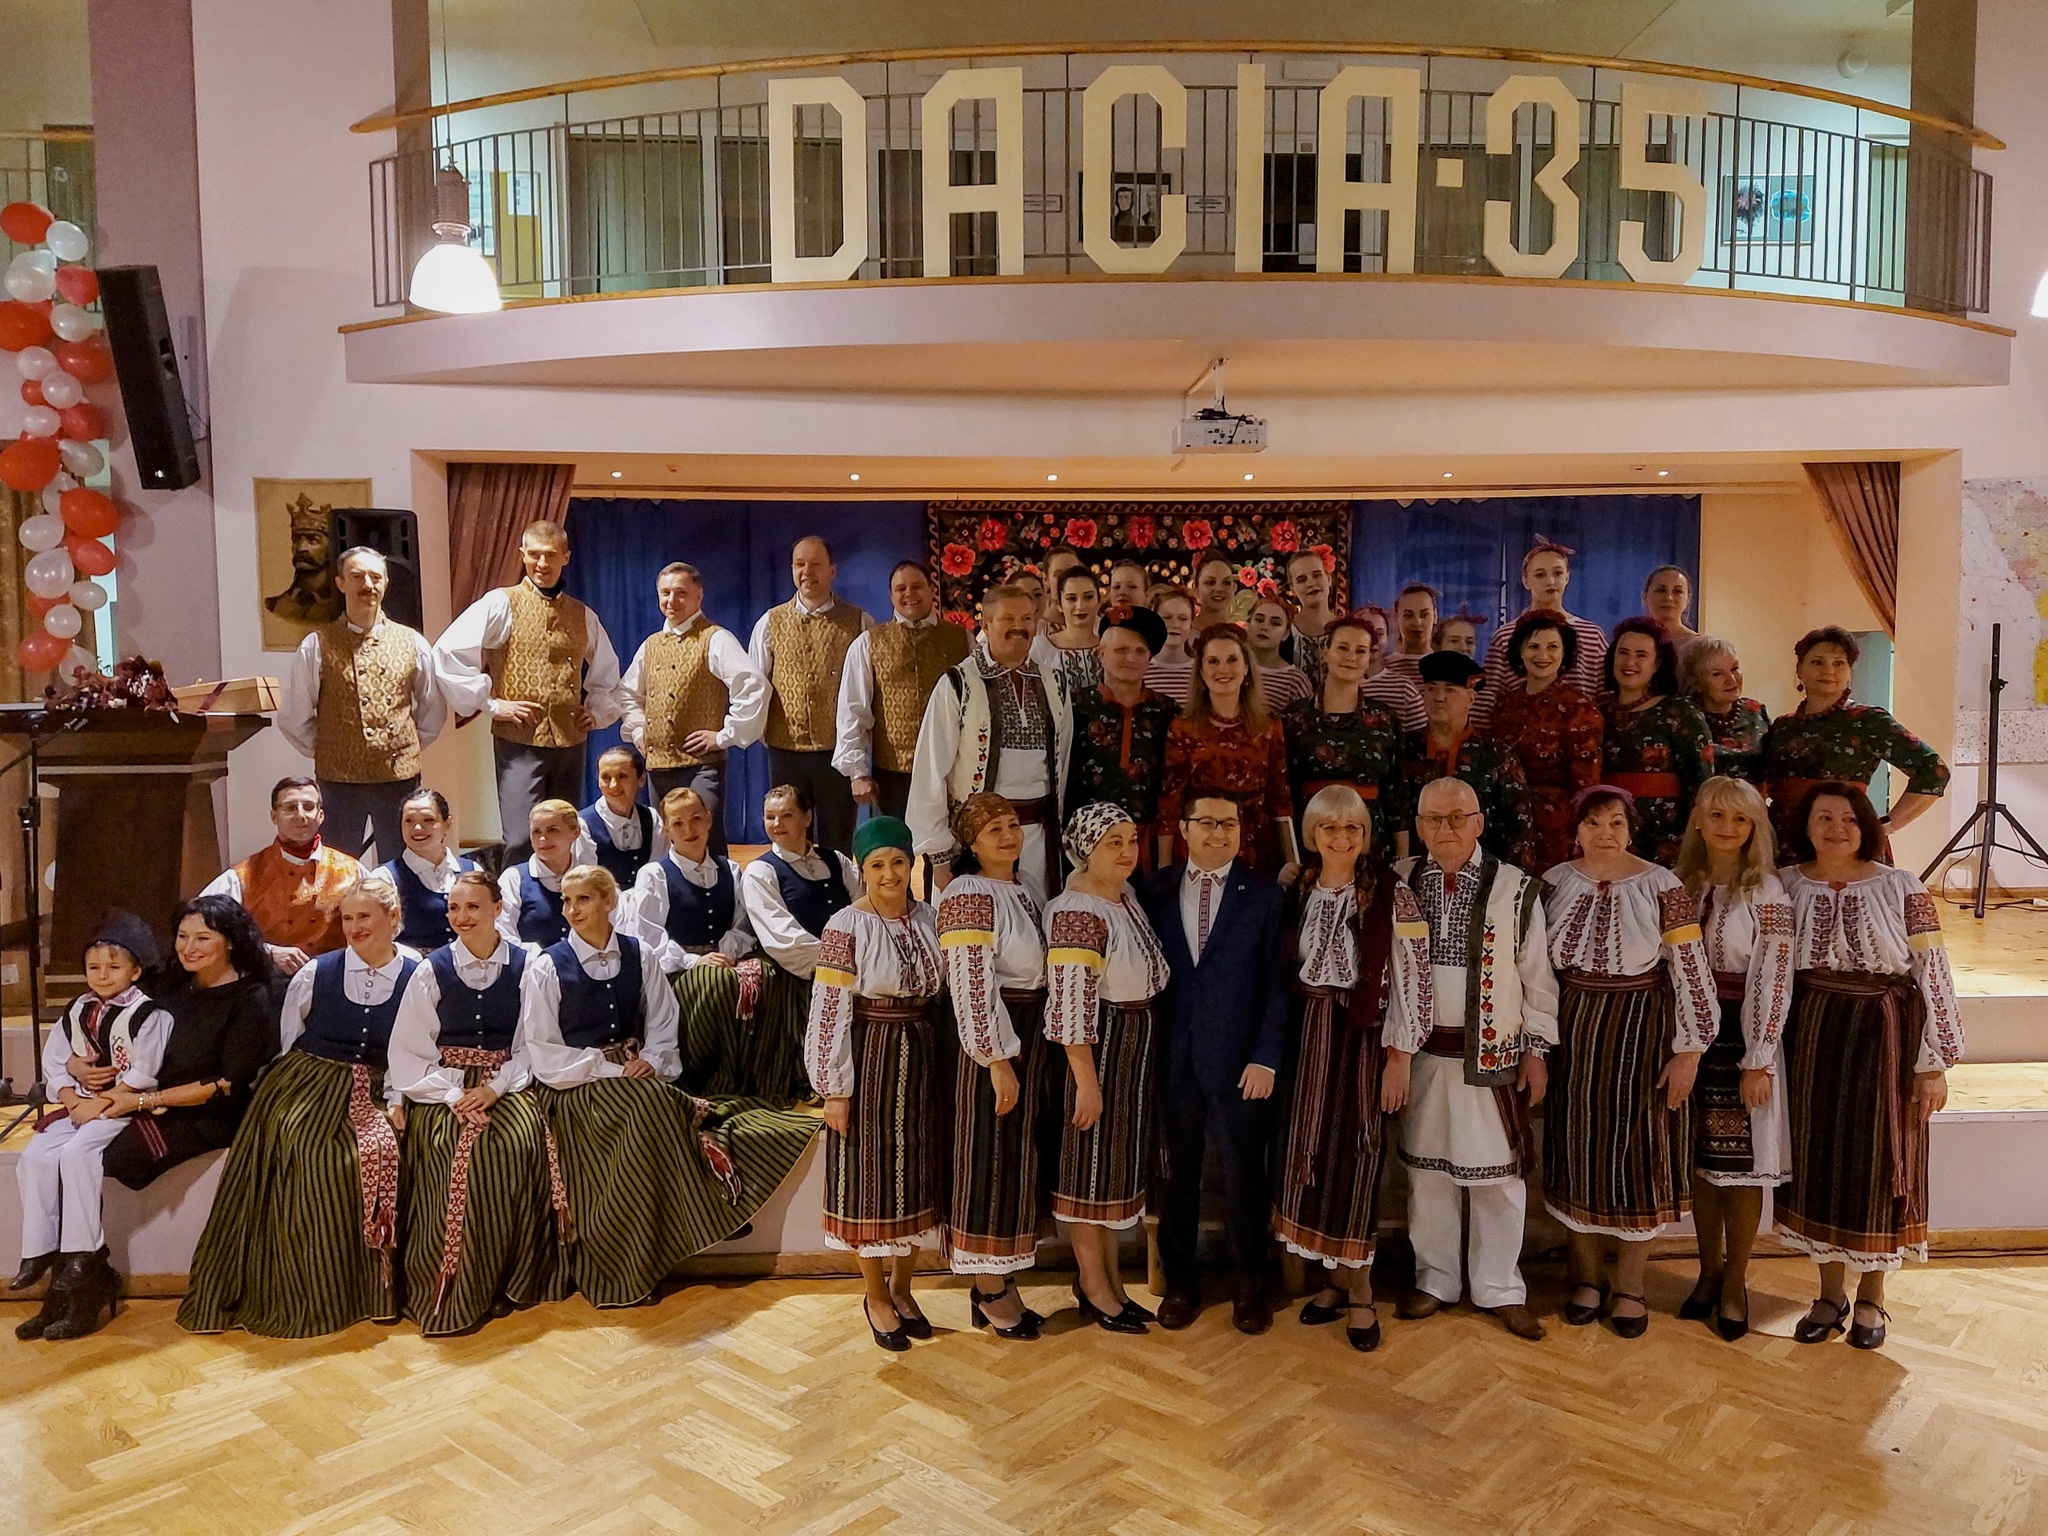 Latvian Center of Moldovan Culture "Dacia" marks 35 years of promoting Moldovan traditions and culture in Latvia